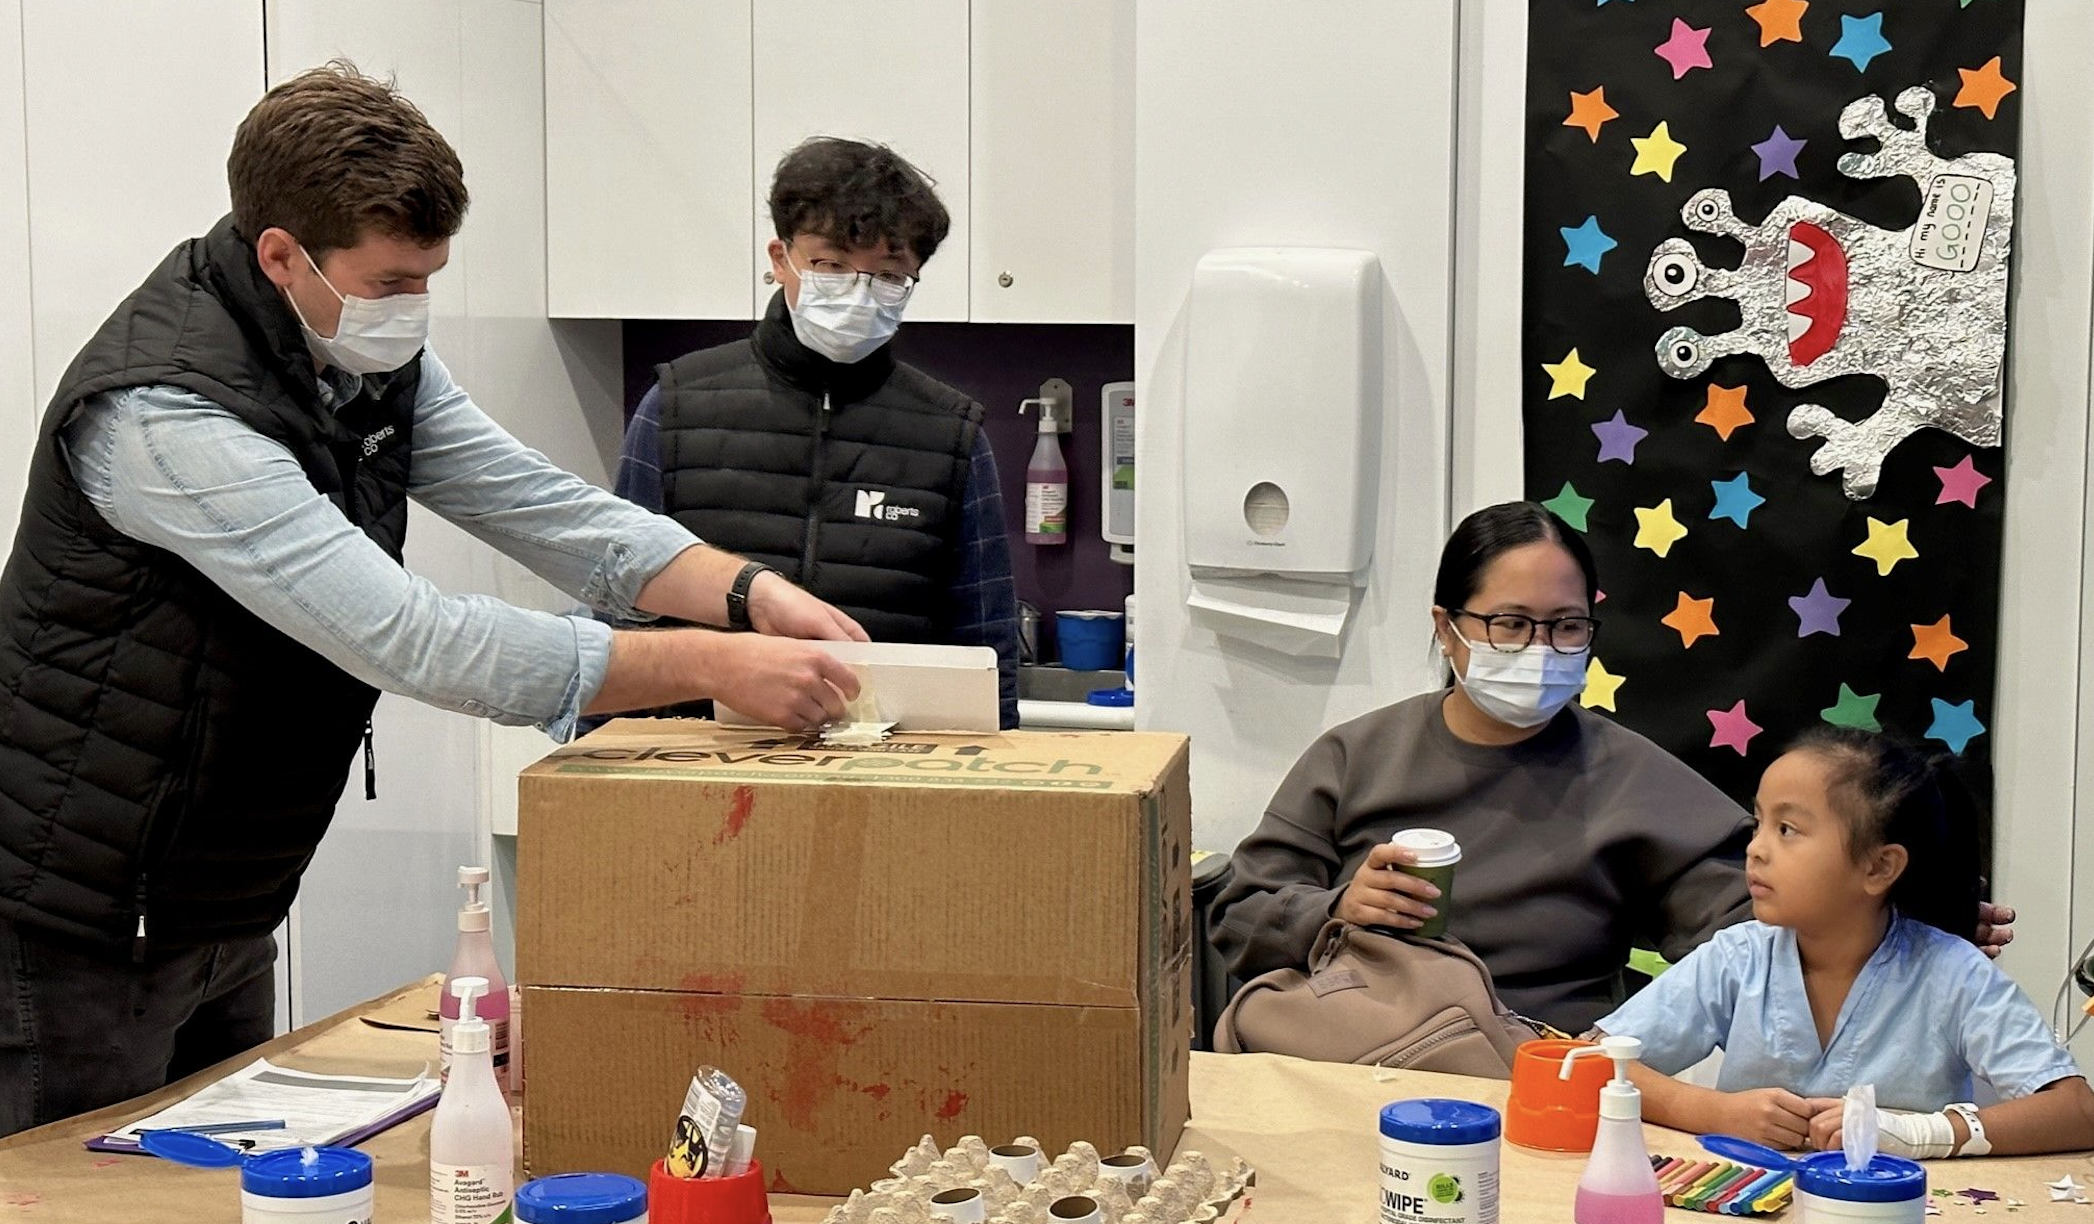 Community Connection Through Innovation: Minecraft for the Kids at The Children’s Hospital